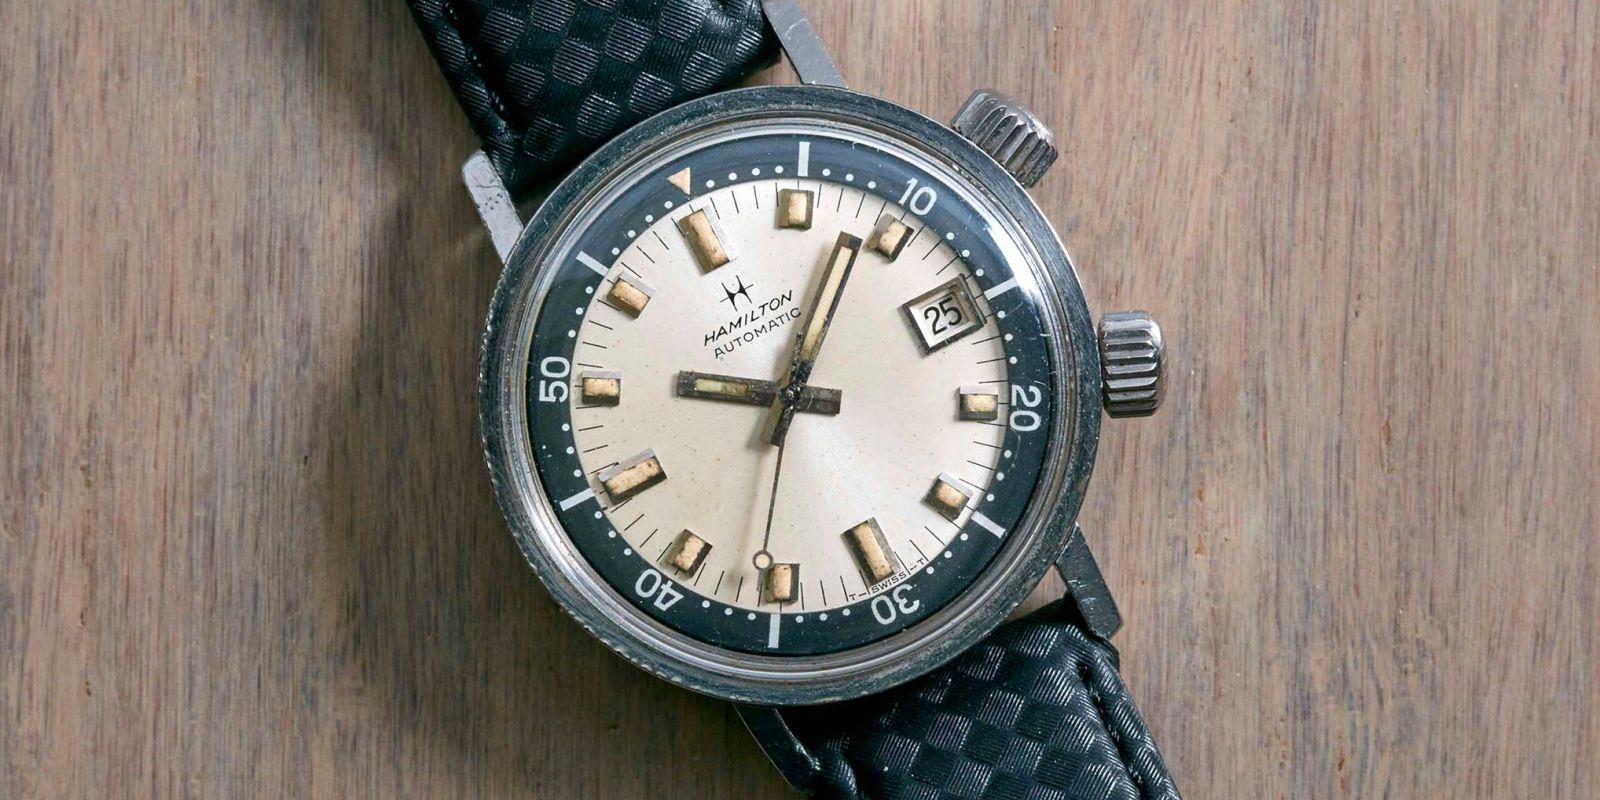 Vintage Watches & Cars - Watches | Omega - 1940 Chronometre 30t2scrg Ref.  2367 Scientific Dial